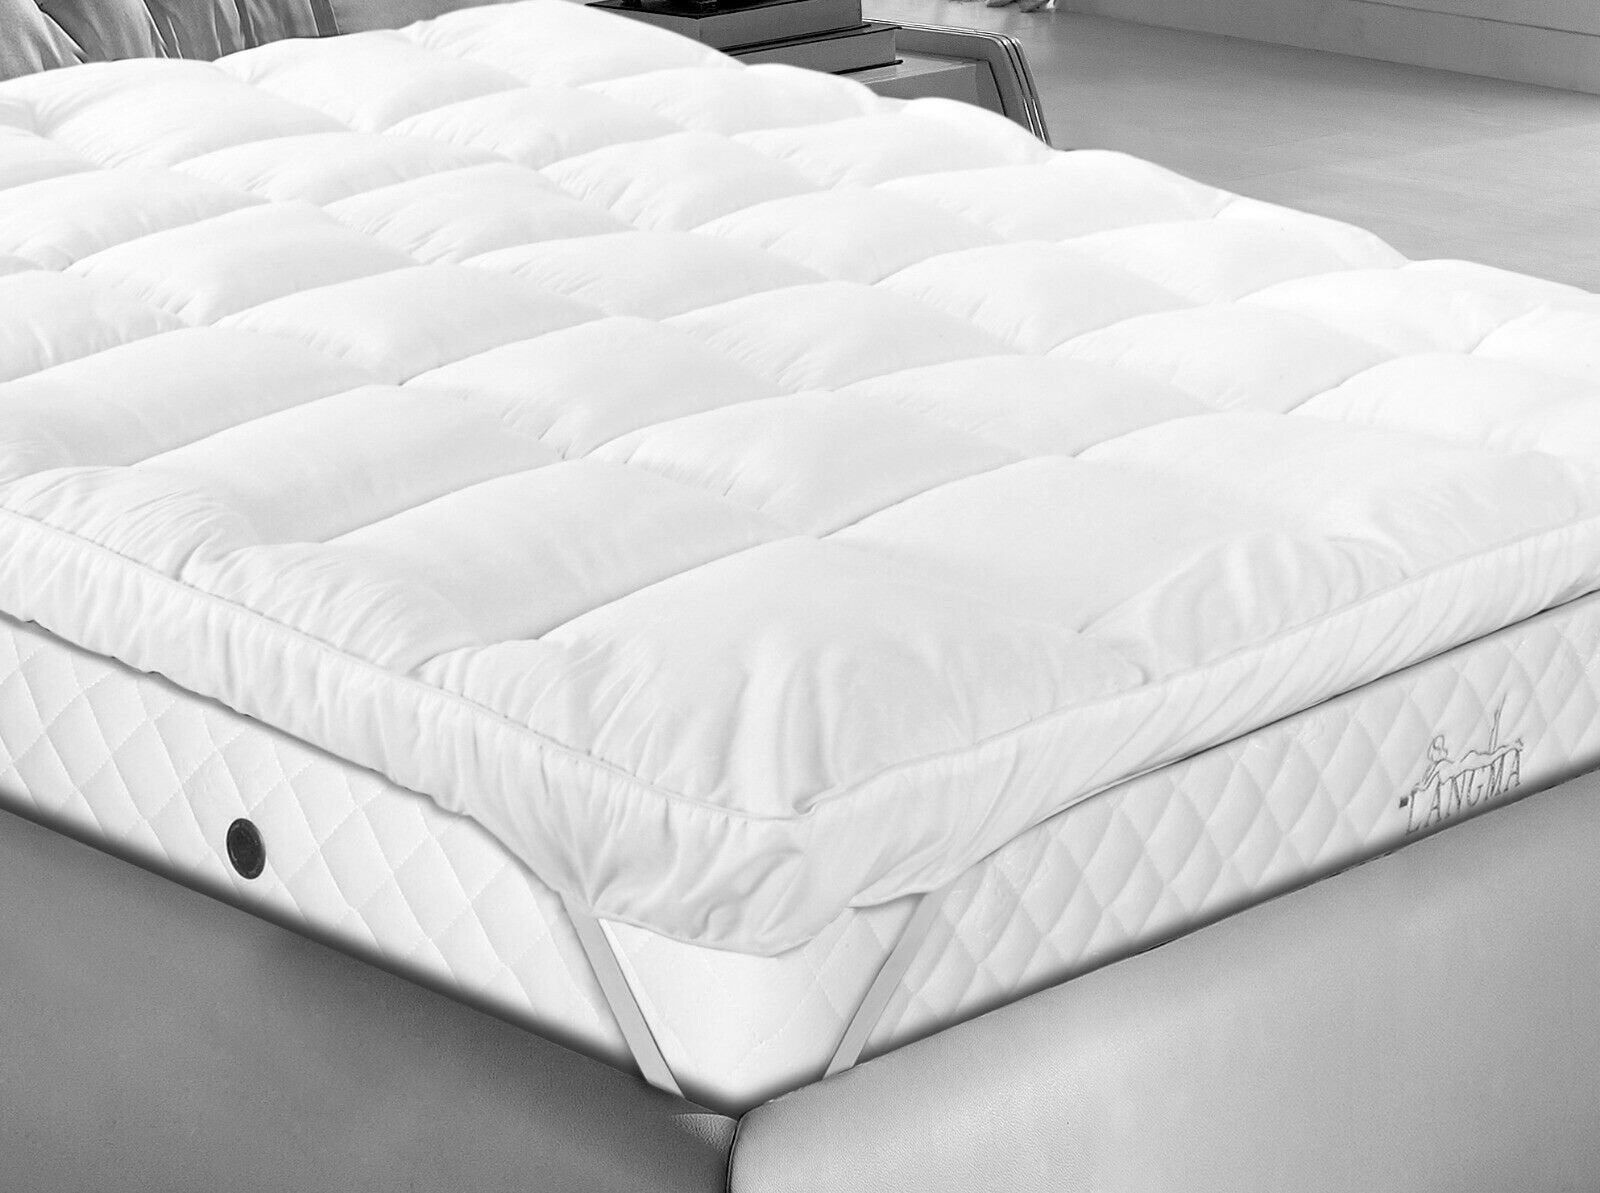 10cm Deep Mattress Topper Luxury Cotton Cover Single,Double,King,Superking 4" 